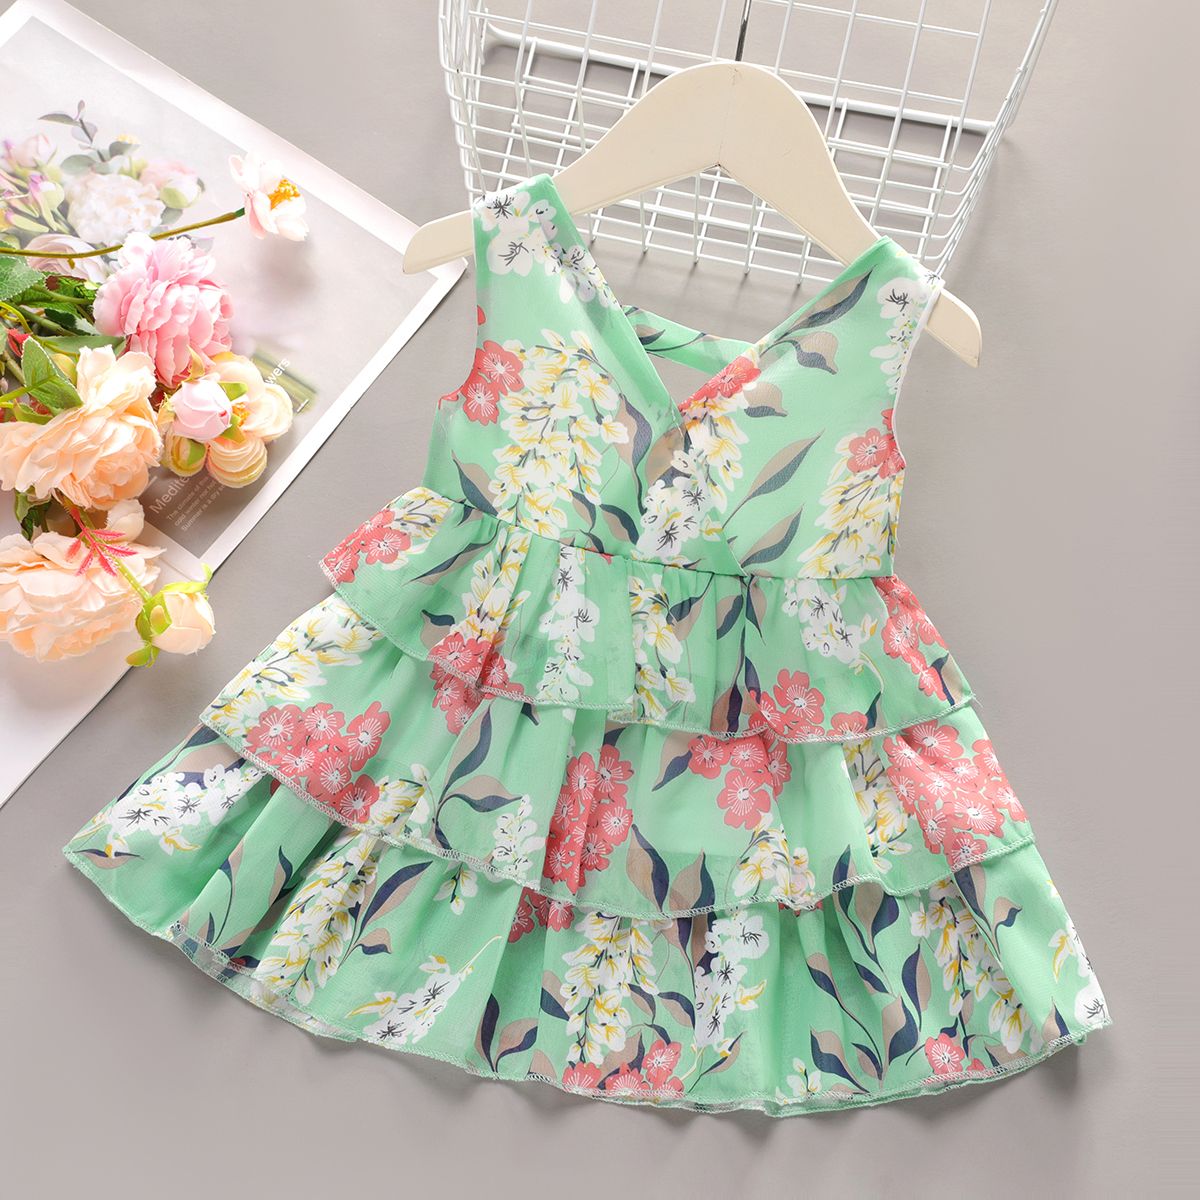 Dots Or Floral Print Flounce Layered Sleeveless Baby Dress